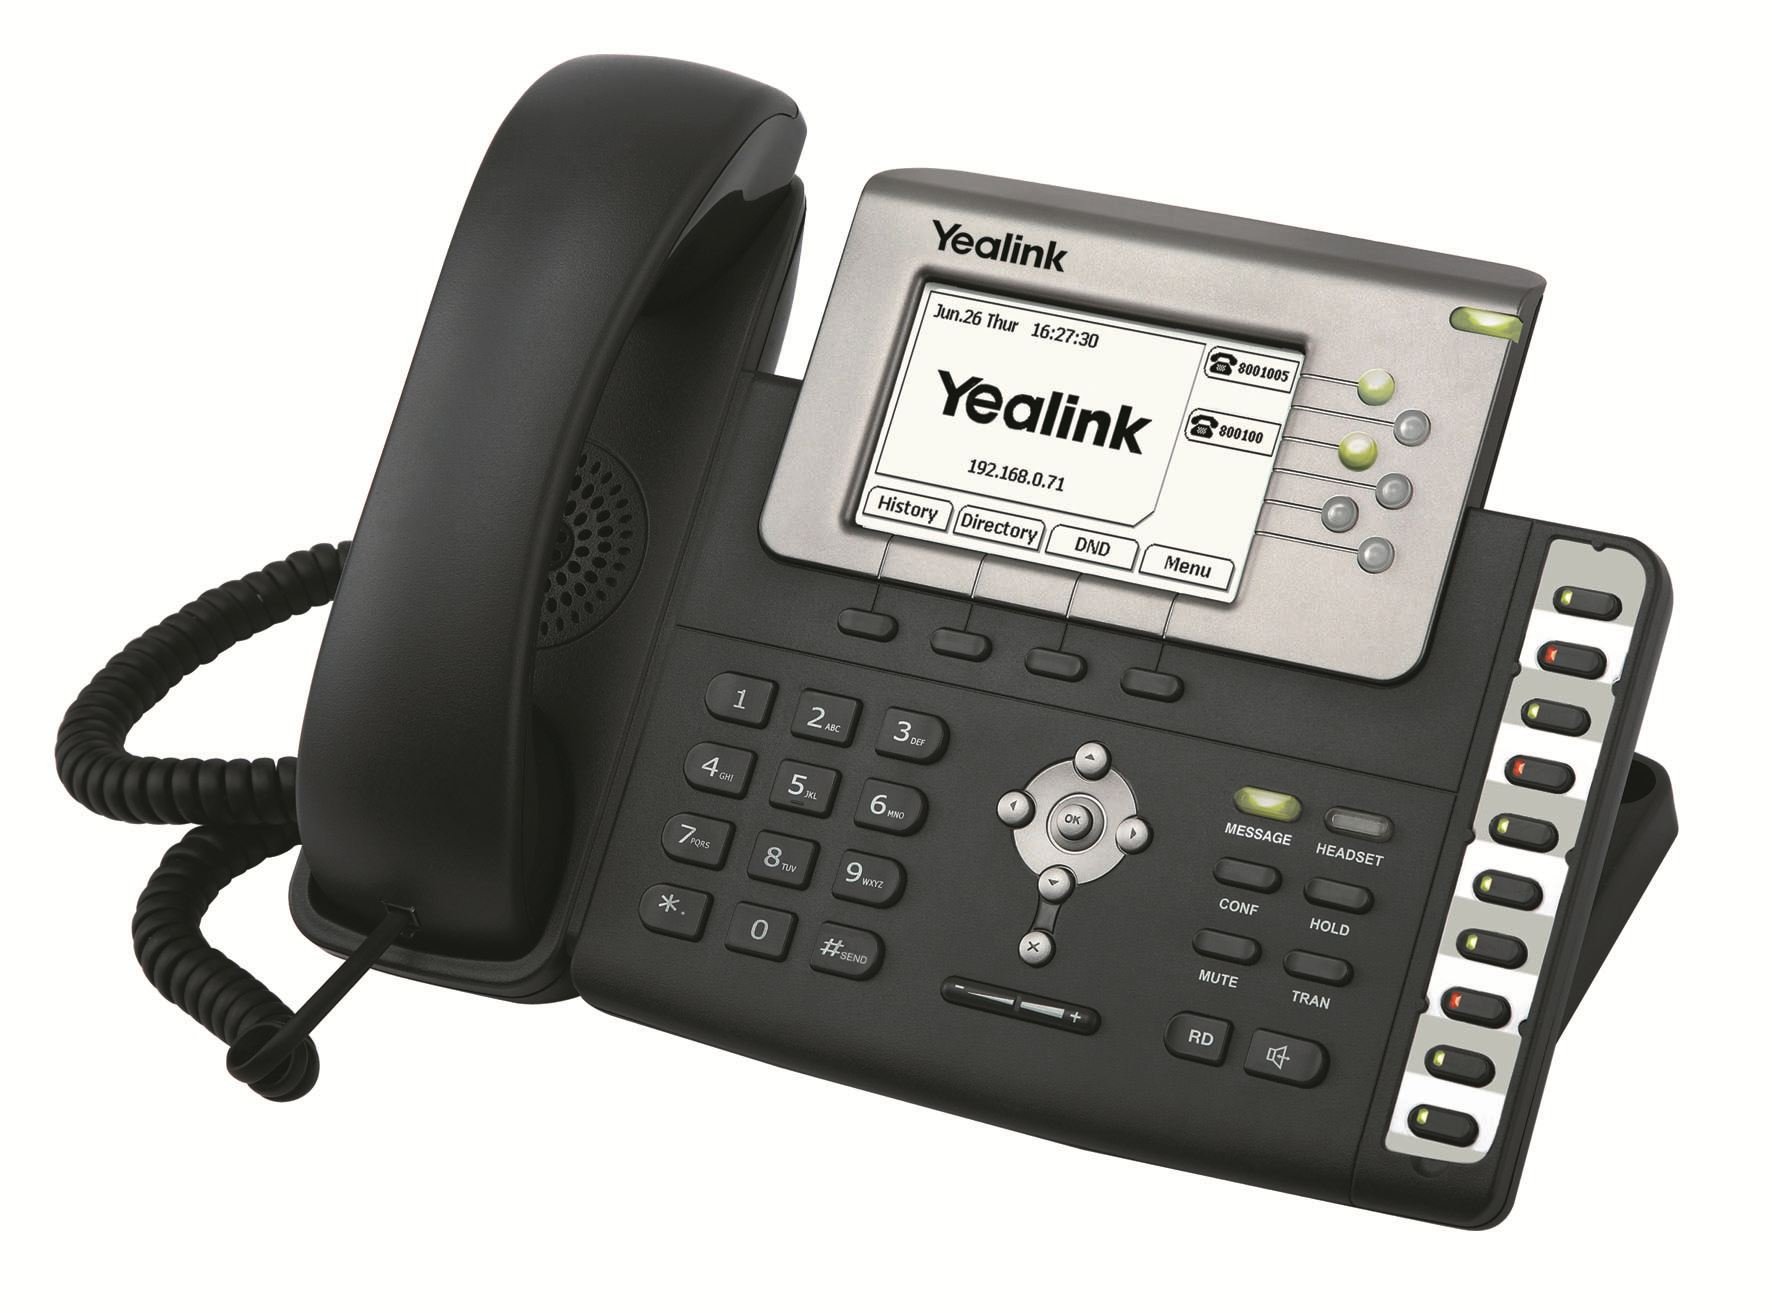 Best VoIP Phone 5 Options by Price [List]